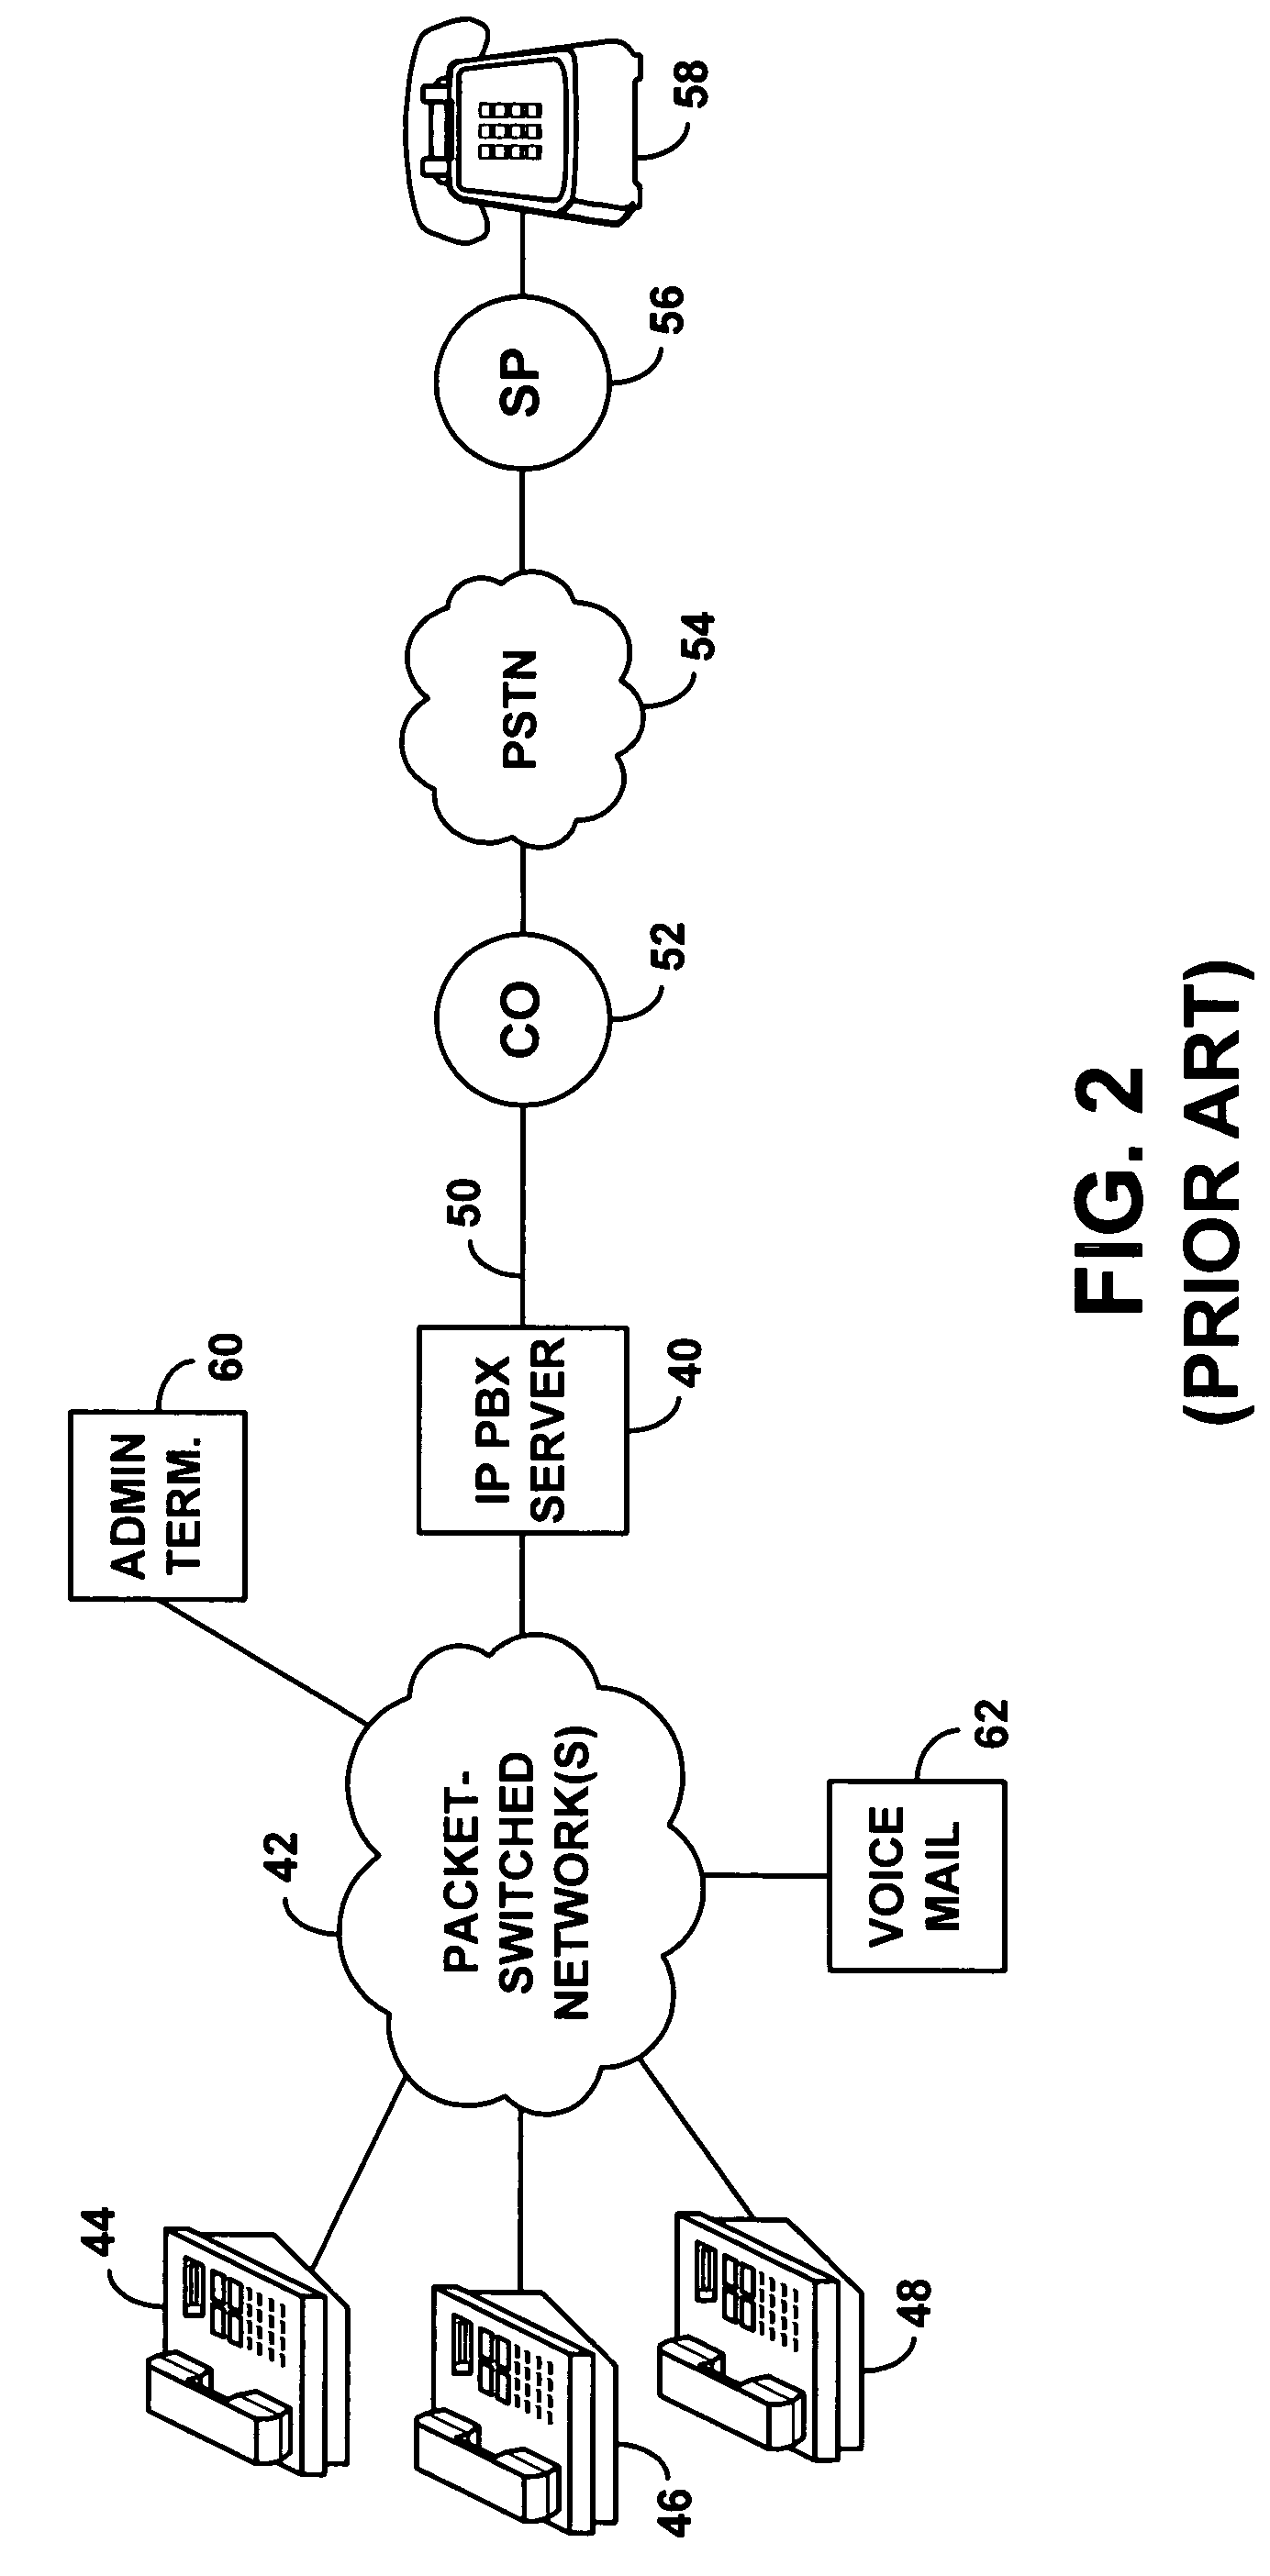 Method and system for extending IP PBX services to cellular wireless communication devices